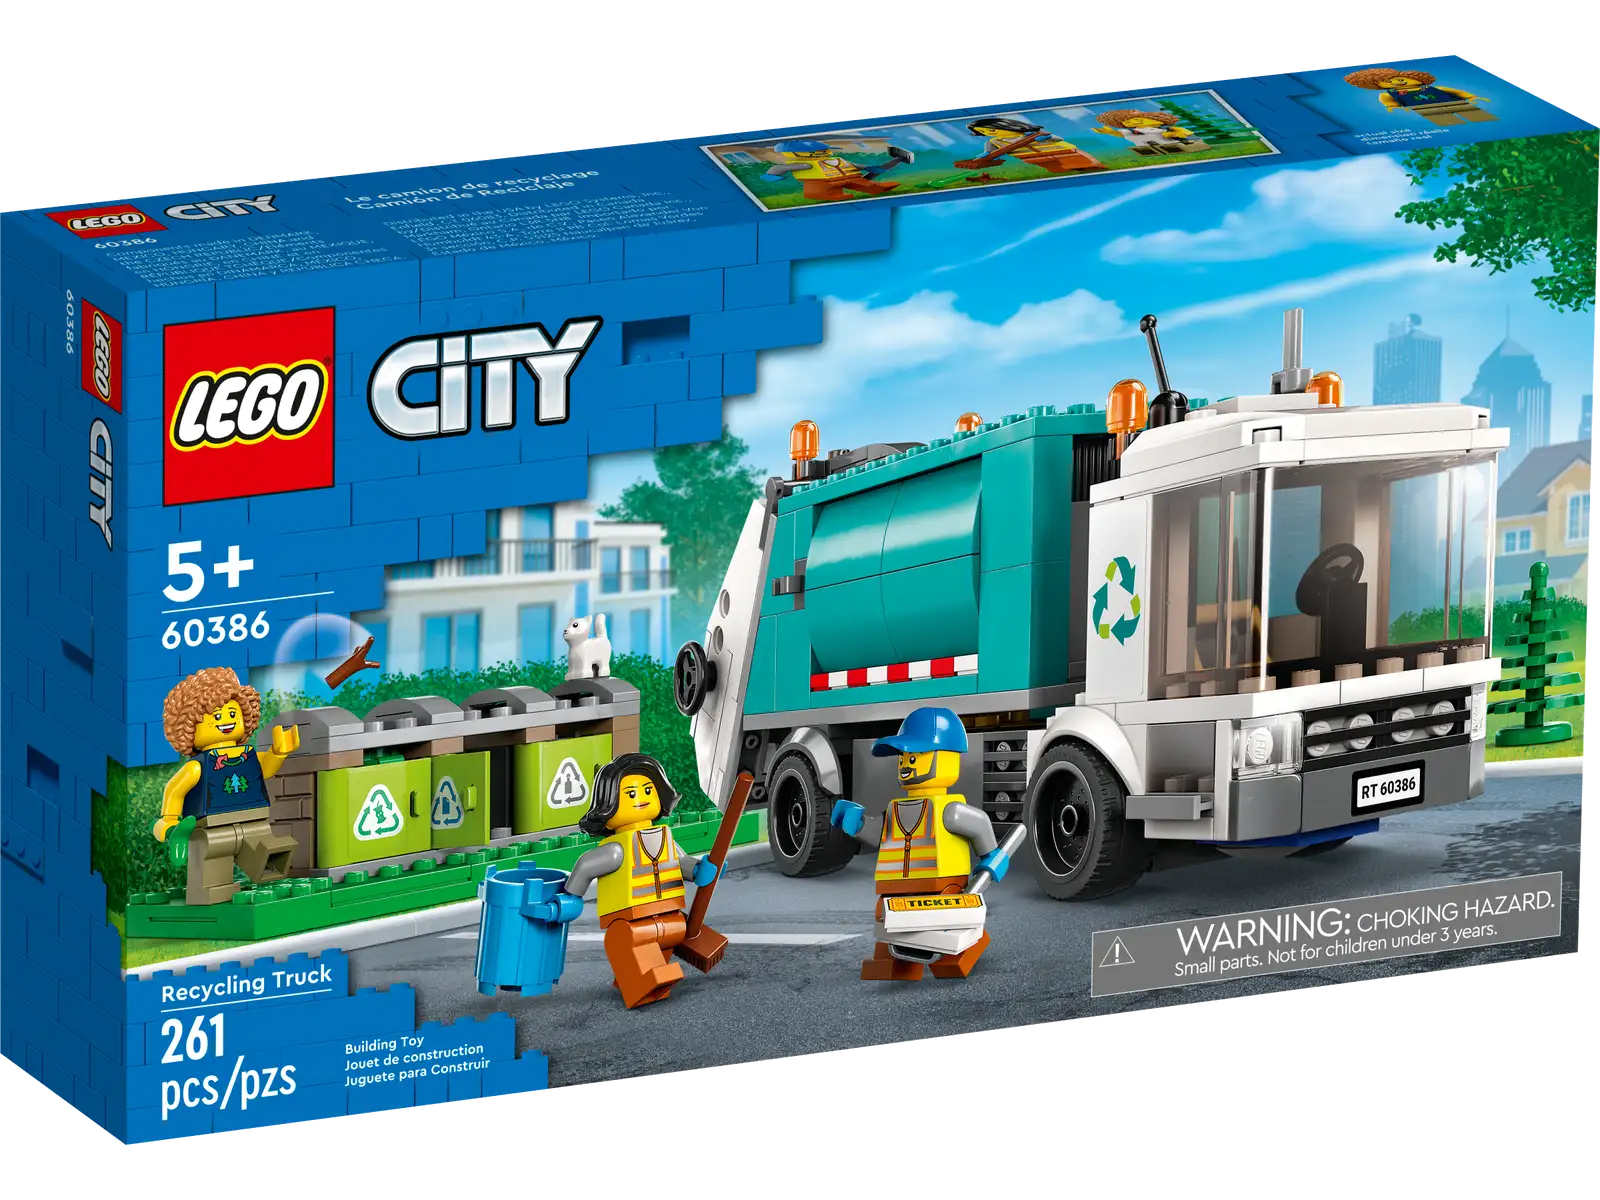 This 5+ LEGO® City Recycling Truck (60386) set comes with lots of realistic features, including a recycling center with 3 containers. The truck features a tipping platform for emptying the containers and a raisable flatbed for offloading. Just add the 3 minifigures and cat figure and let the fun begin. Printed and digital building guides Includes easy-to-follow pictorial building guide and the LEGO Builder app – a digital building guide with intuitive zoom and rotate tools that enable kids to visualize the finished model from all angles as they build. A LEGO City Great Vehicles toy building set Kids grow up surrounded by amazing vehicles and machines, and with LEGO City Great Vehicles building sets they get to explore them up close, with realistic models and fun characters that inspire open-ended imaginative play. Toy Recycling Truck – Caring for the environment is fun with this LEGO® City Recycling Truck (60386) playset, complete with a recycling center setting What’s in the box? – Everything kids need to build the LEGO® City Recycling Truck, plus a toy recycling center with 3 containers, 3 minifigures and a cat figure Fun functions for children who love realistic role play – Kids can activate the tipping platform to empty the recycling containers into the truck and raise the truck’s flatbed foroffloading A LEGO® gift for any occasion – Give this playset as a birthday or any-other-day surprise for kids 5 and up Dimensions – When built, the Recycling Truck measures over 3 in. (8 cm) high, 8 in. (21 cm) long and 2 in. (6 cm) wide No batteries required – This battery-free playset is powered by kids’ imaginations Printed and digital building guides – Kids can zoom, rotate and view the model from all angles as they build with the LEGO® Builder app for smartphones and tablets Kids learn as they play – LEGO® City playsets support kids’ learning with fun toys and characters that inspire open-ended imaginative play Quality-controlled building toys – All LEGO® components meet strict industry standards to ensure they are consistent, compatible and fun to build with Putting safety first – LEGO® bricks and pieces are dropped, heated, crushed, twisted and analyzed to make sure they meet stringent global standards for safety